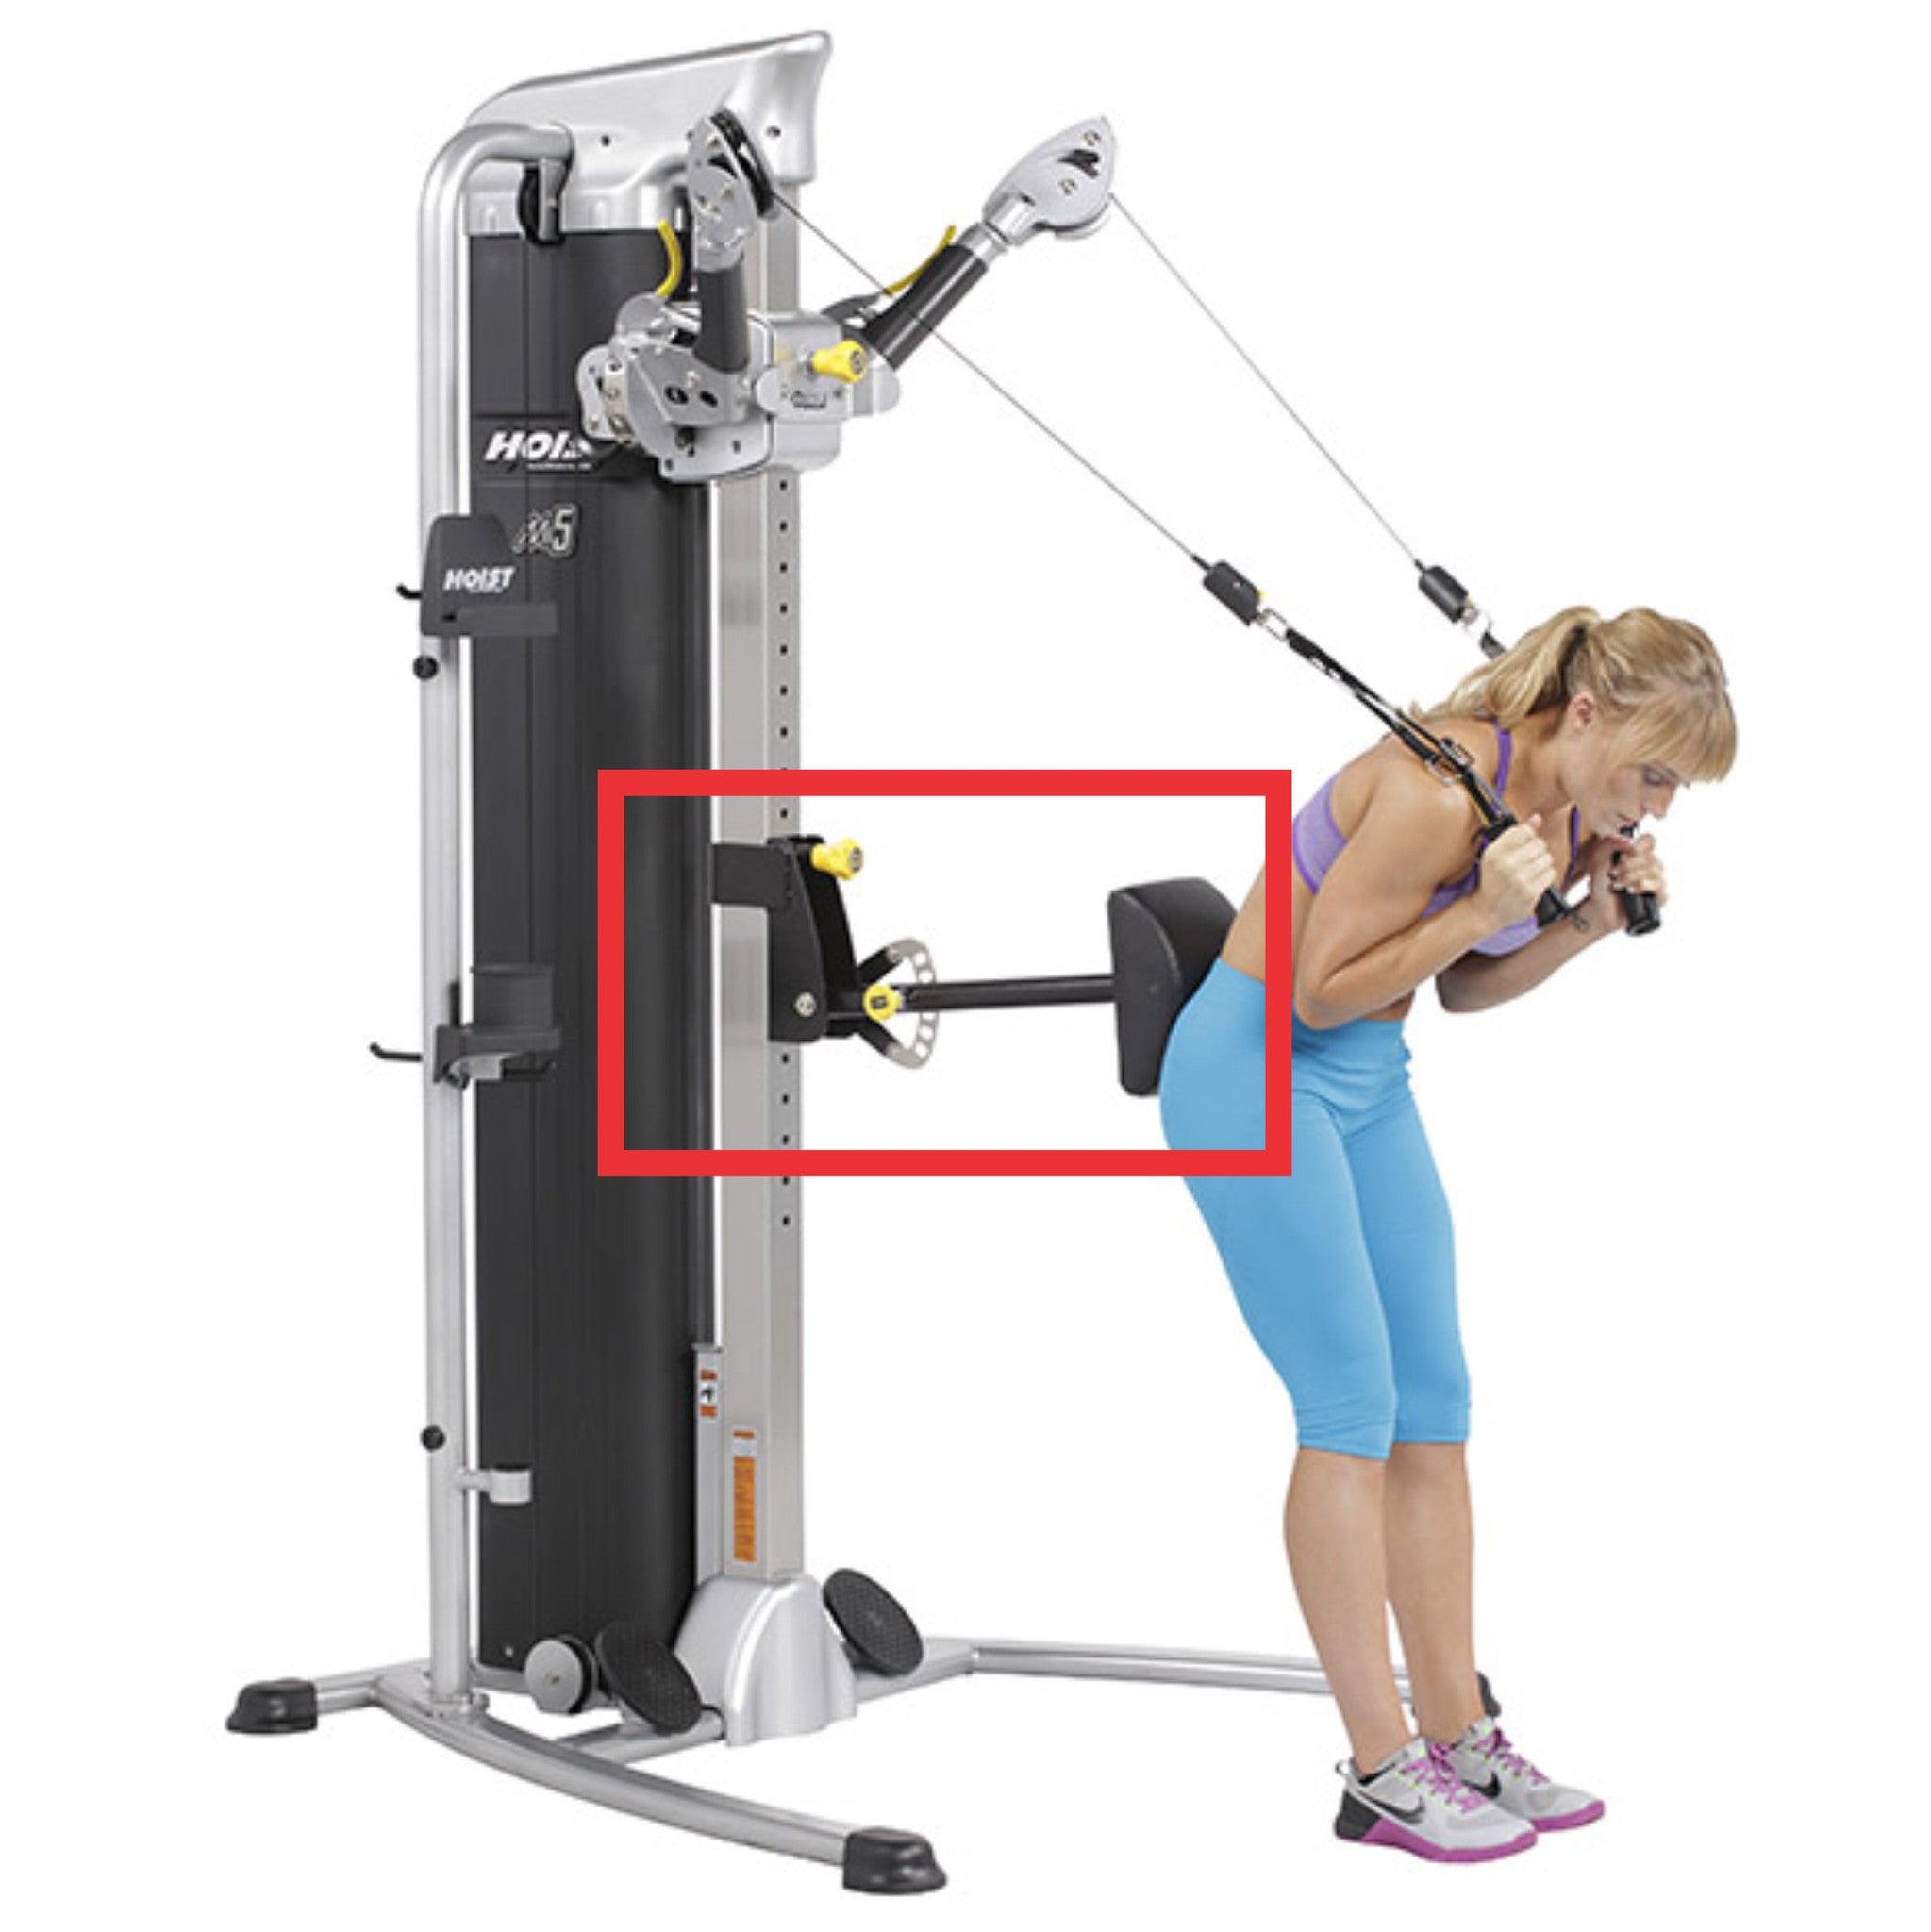 Mi5 Functional Trainer Accessory Kit - Fitness Experience